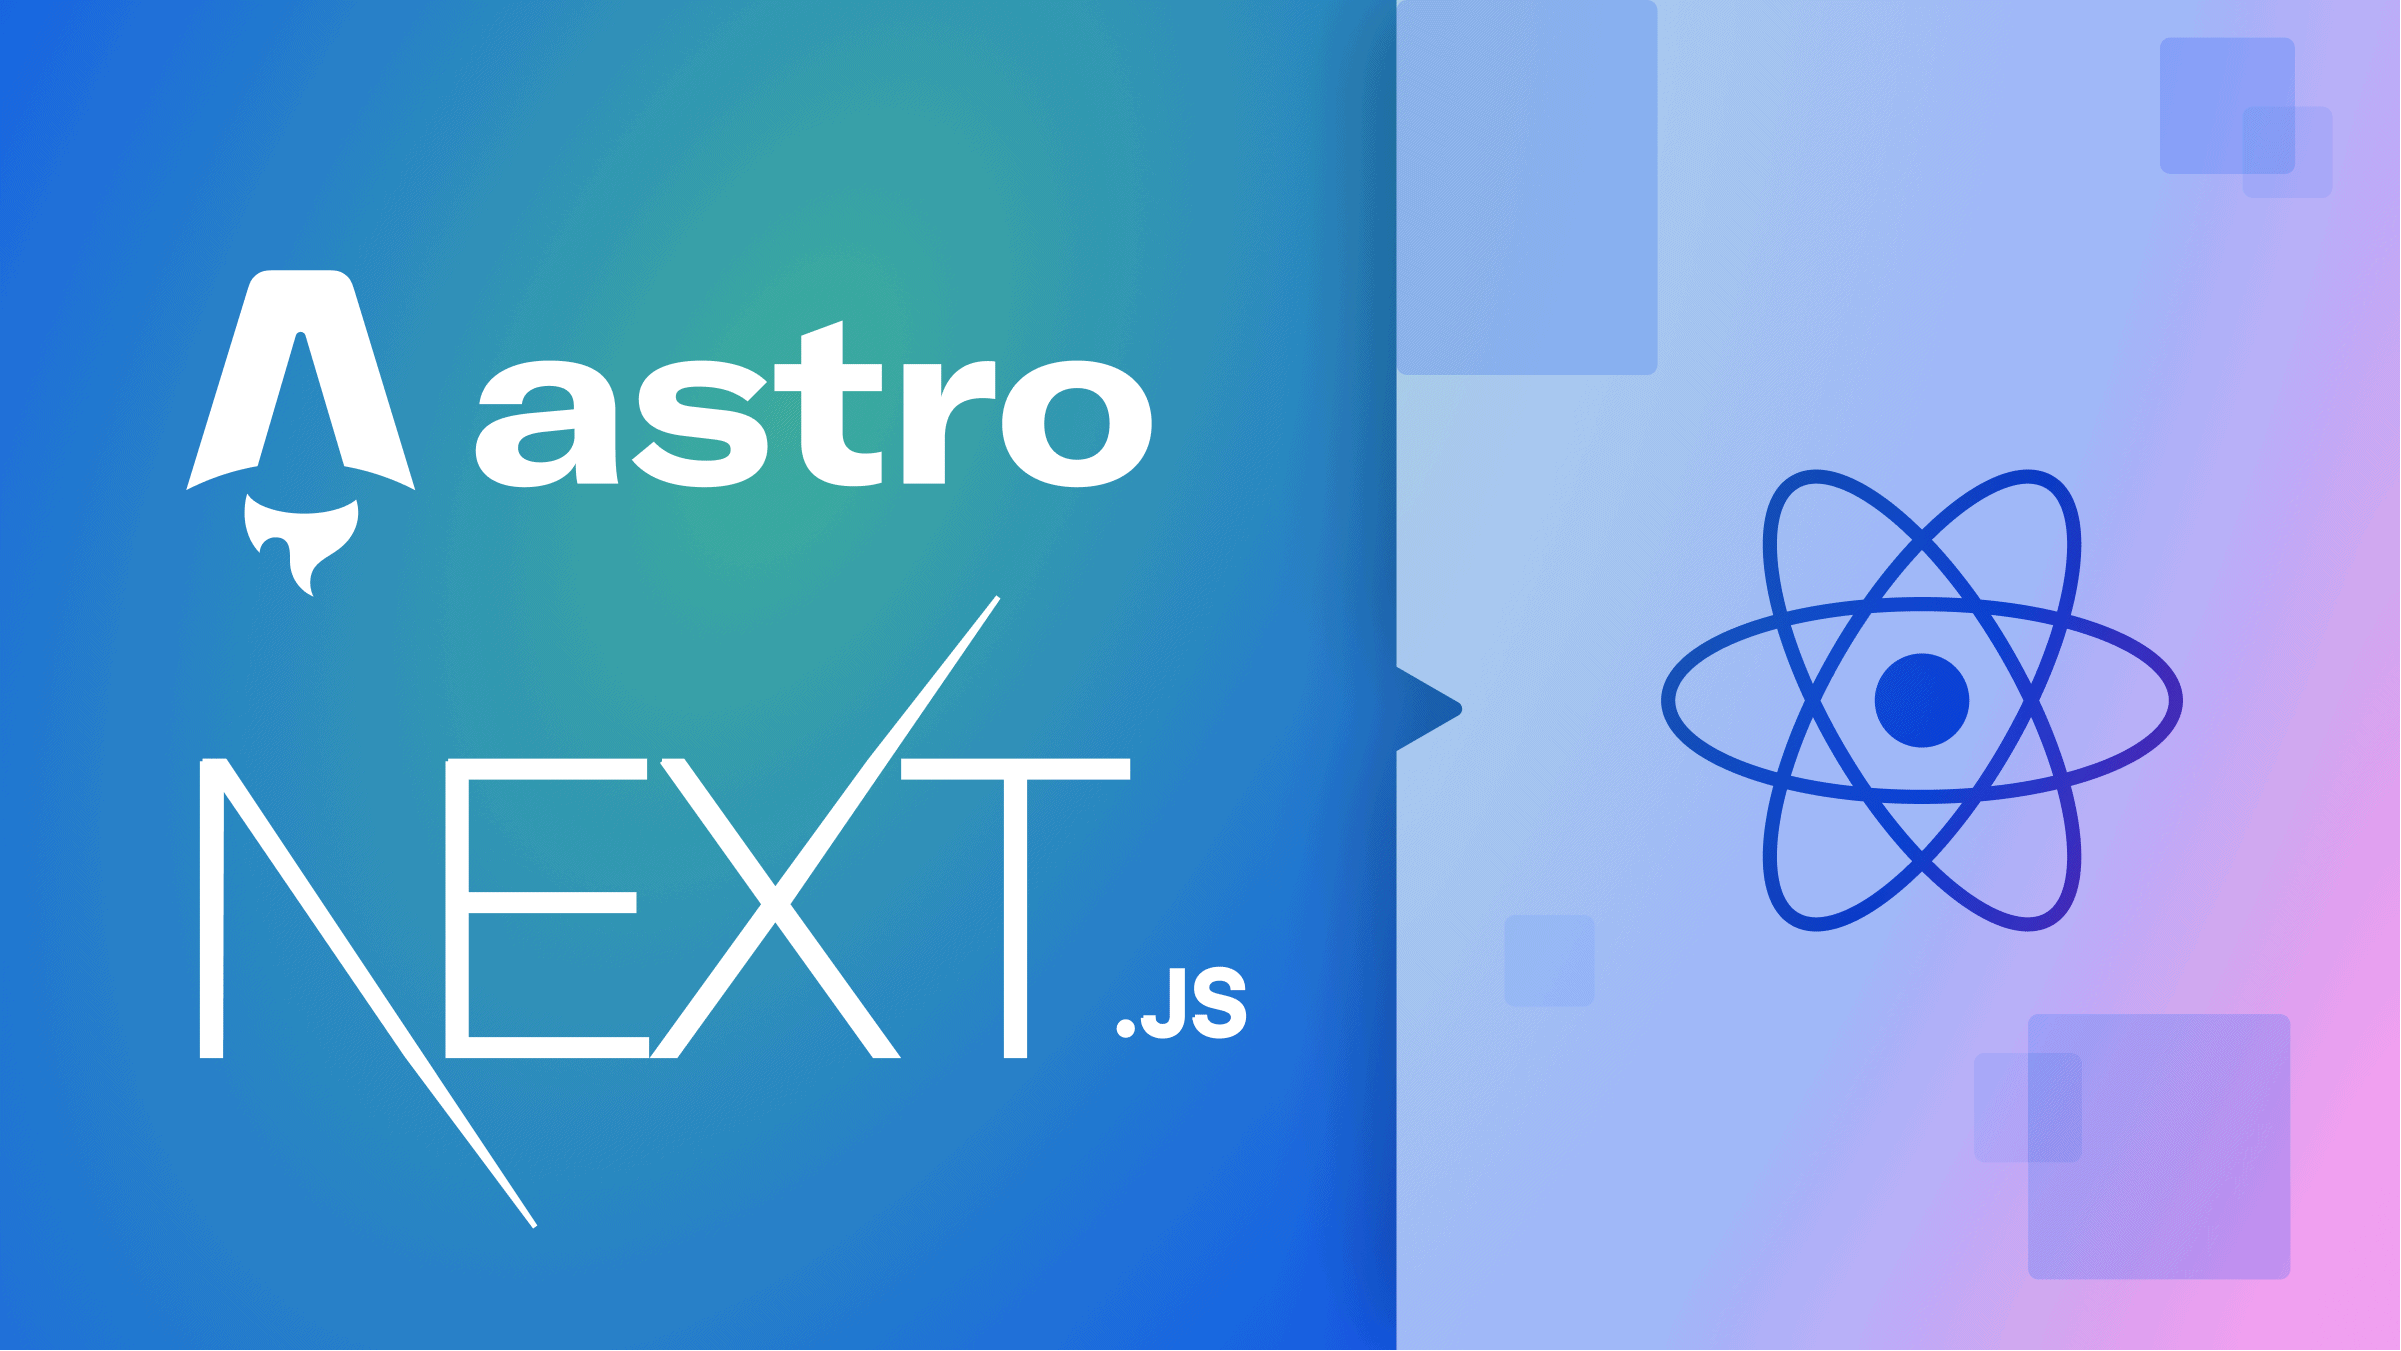 Comparing Astro and Next.js for React apps